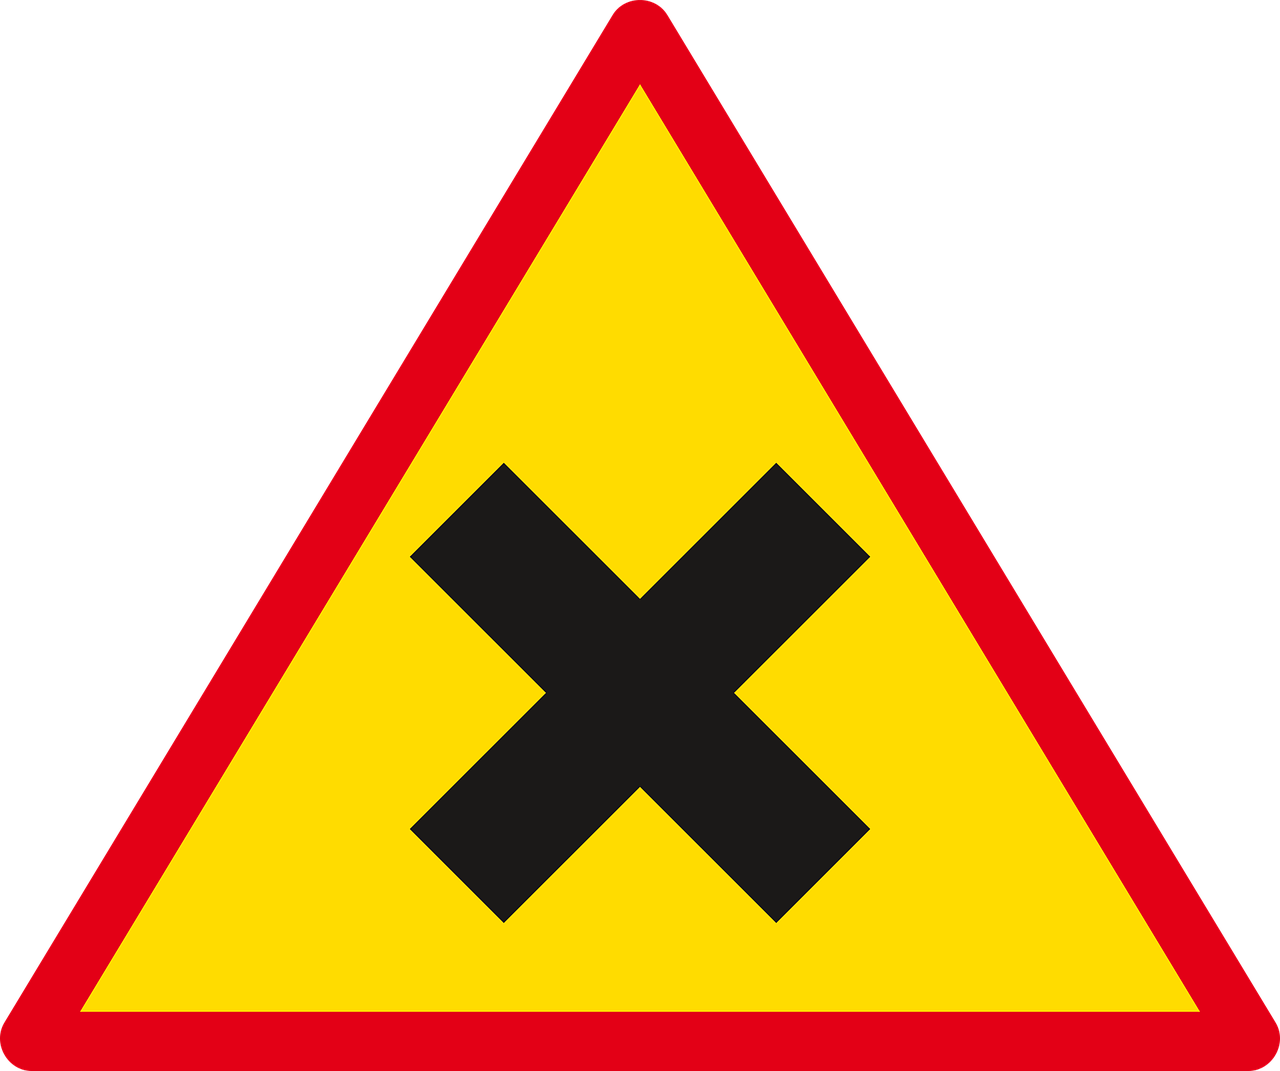 a yellow triangle with a black x on it, by Kees Bol, red yellow, wikimedia, intersection, warning